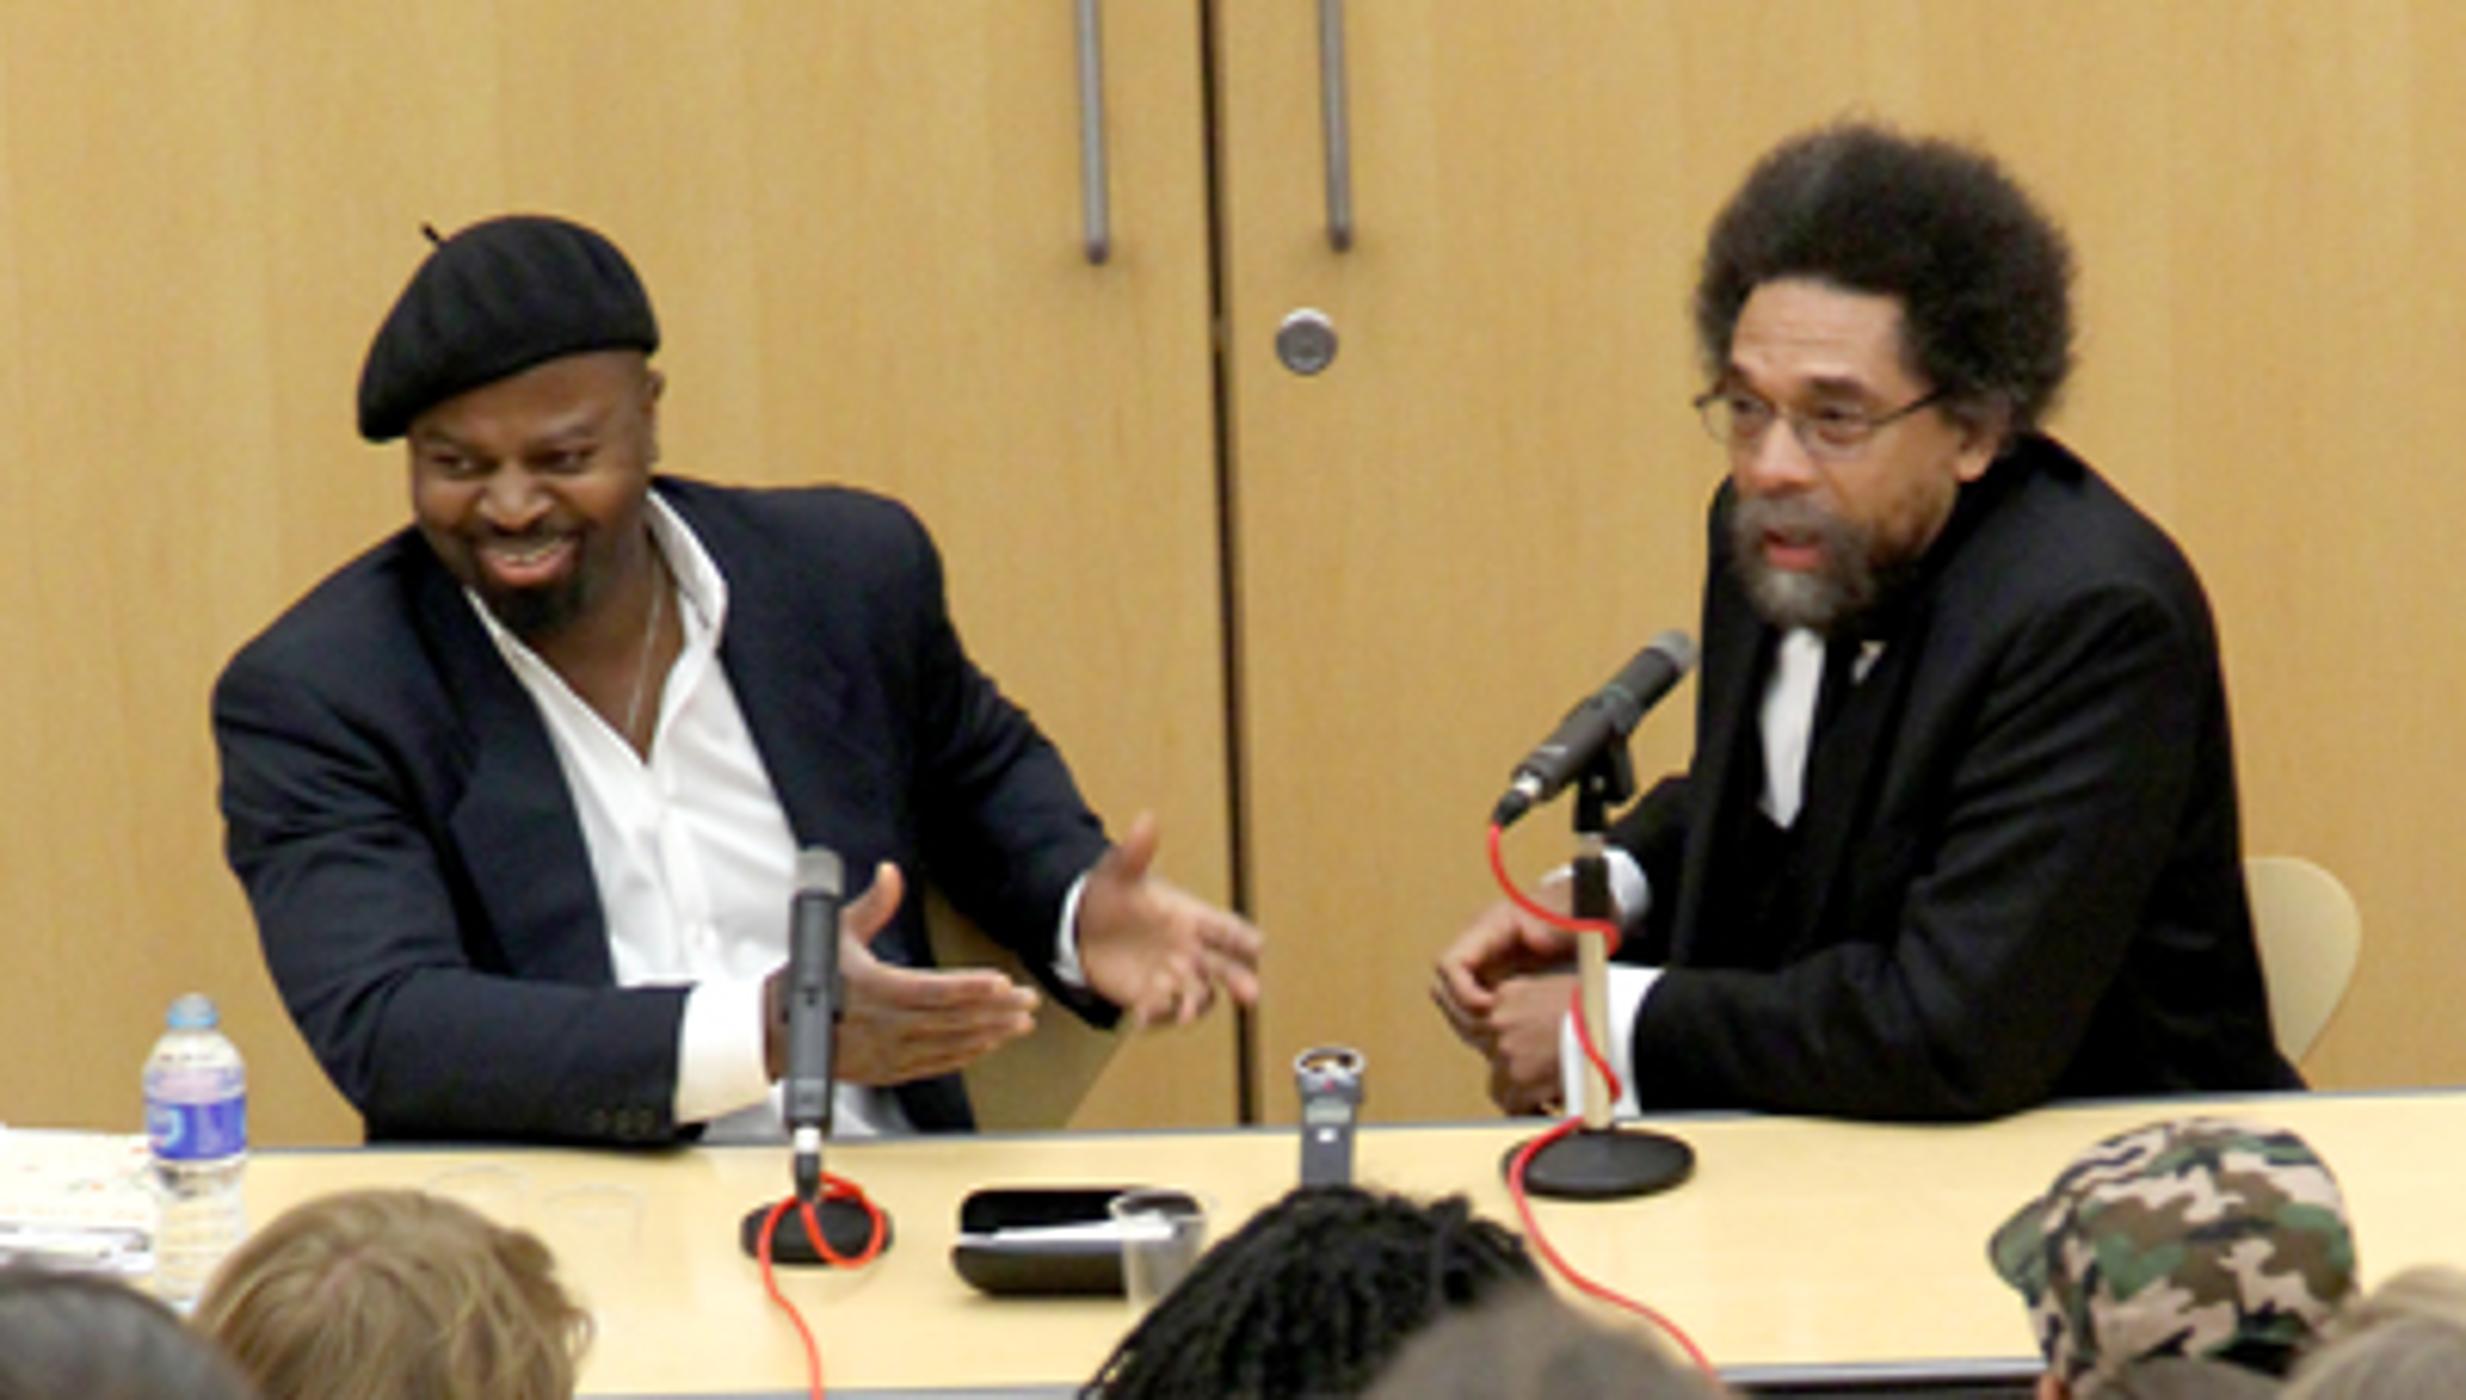 Professor Cornel West in conversation with Ben Okri on Literature and the Nation